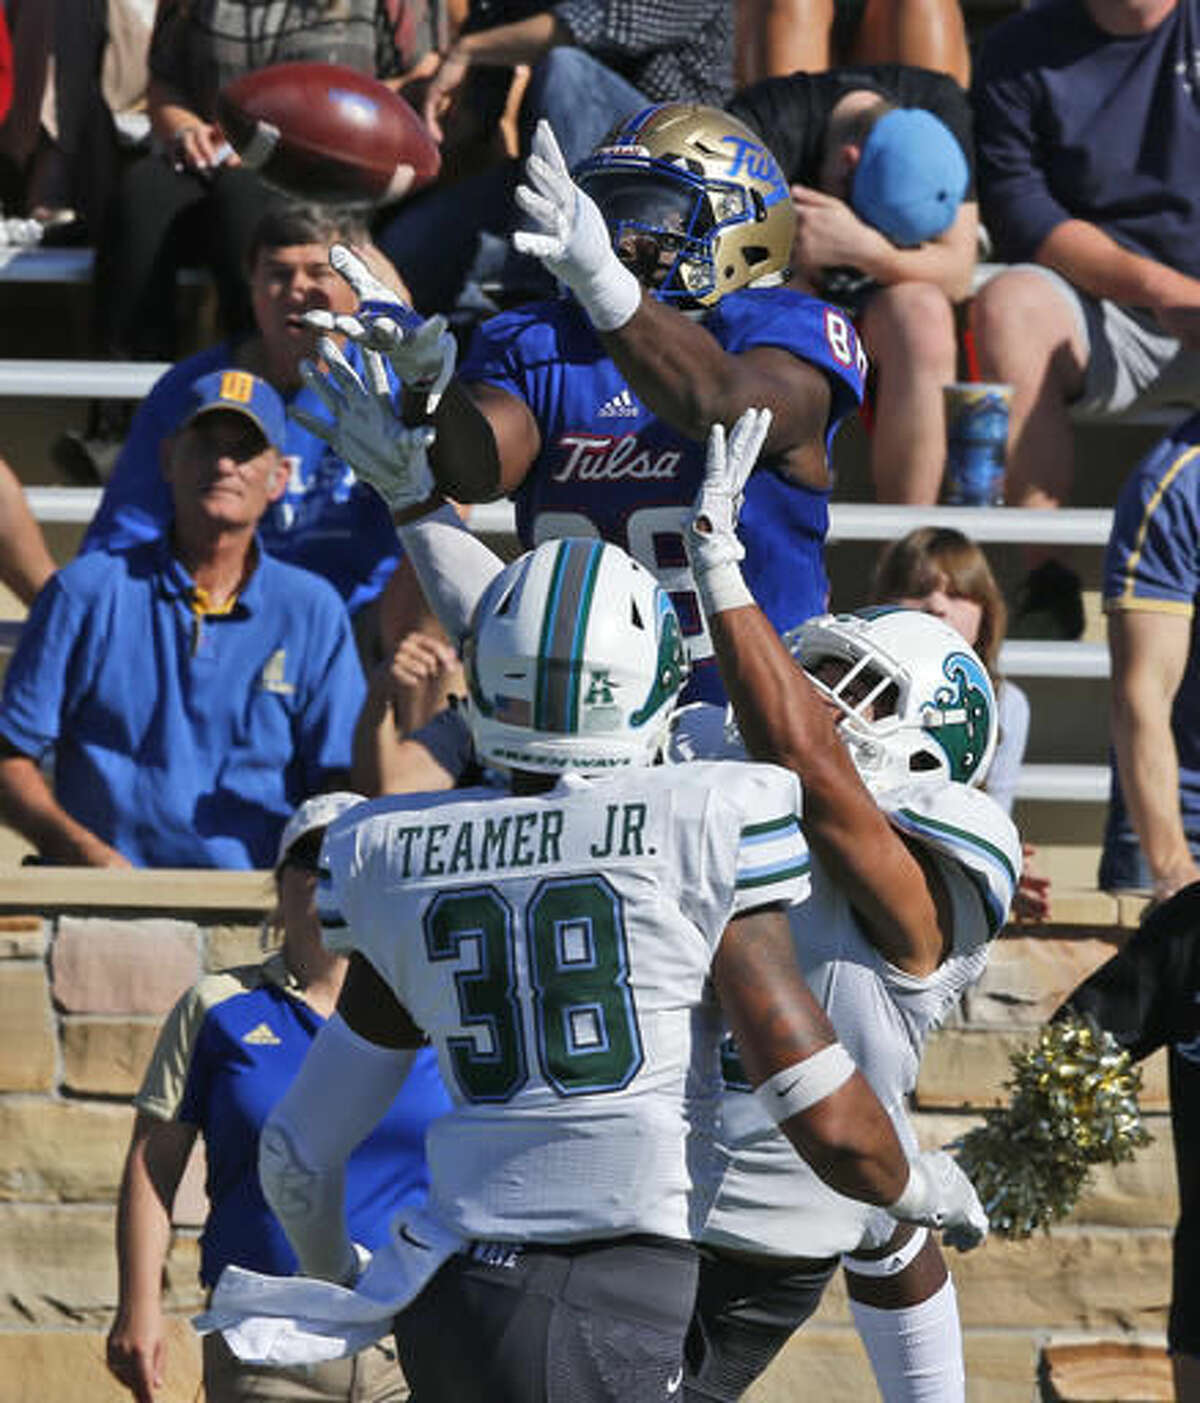 Tulsa wide receiver Josh Atkinson (88) jumps to catch a pass in front of Tulane safety Roderic Teamer (38) and Richard Allen, center, in the first quarter of an NCAA college football game in Tulsa, Okla., Saturday, Oct. 22, 2016. Atkinson took the pass in for a touchdown. (AP Photo/Sue Ogrocki)